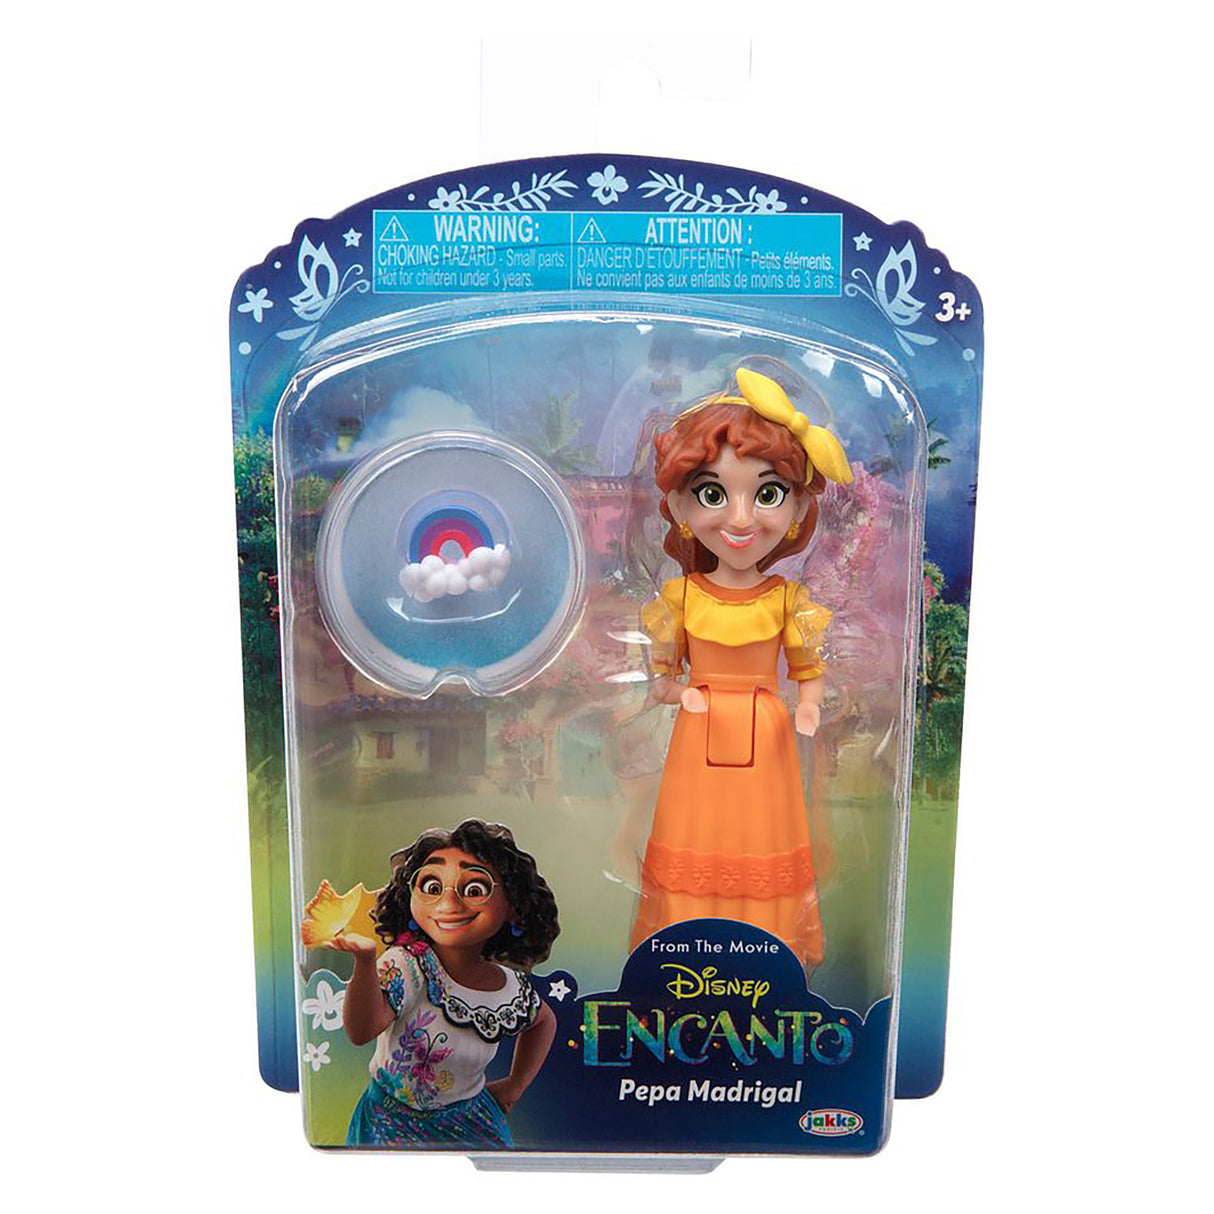 Disney Encanto Pepa Madrigal Small Doll with Accessory (3 inches)